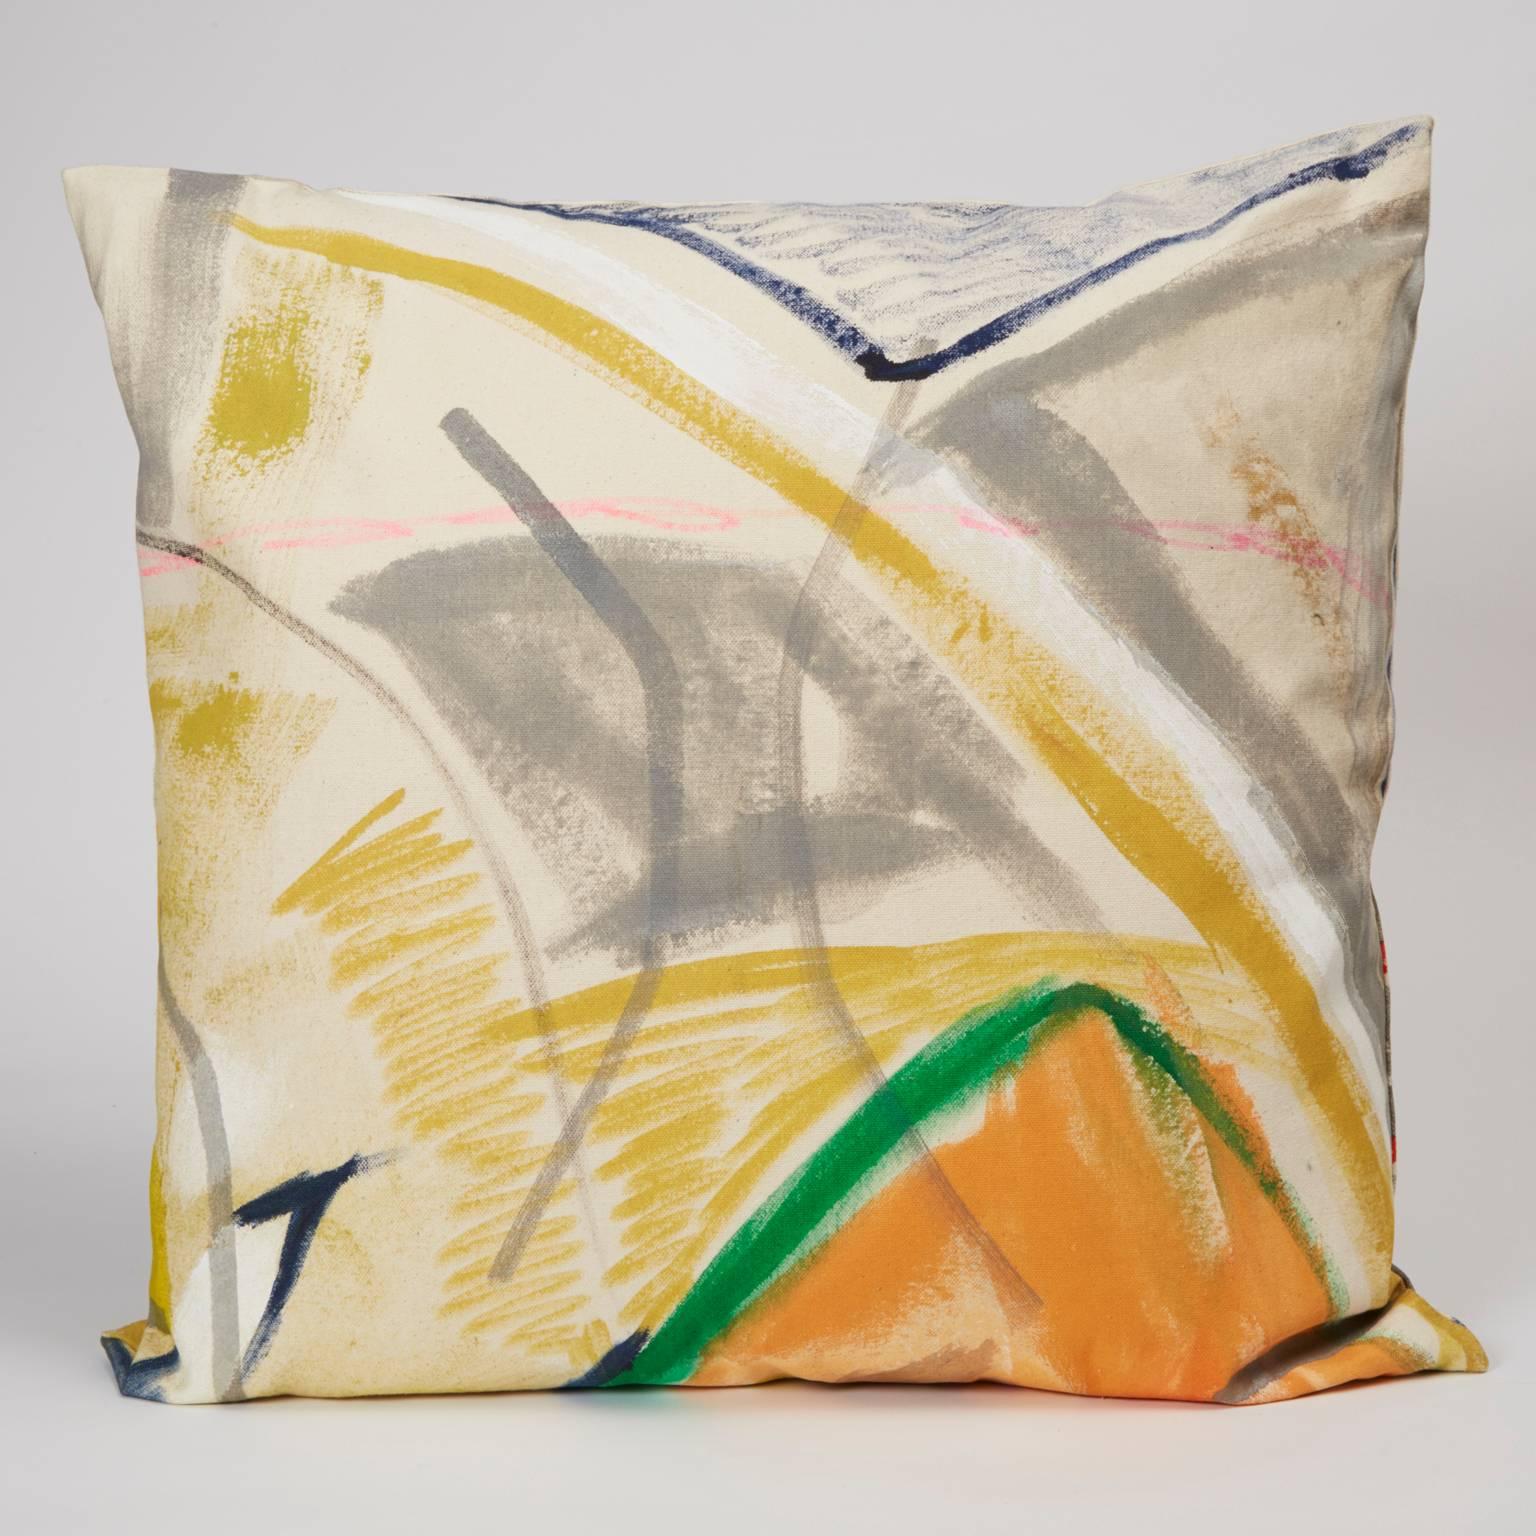 Hand-painted by artist Naomi Clark, each cotton canvas pillow is a piece of a much larger, abstract canvas painting. When ordered in multiples, you will receive pillows that are all part of the same composition. These pillows are completely unique